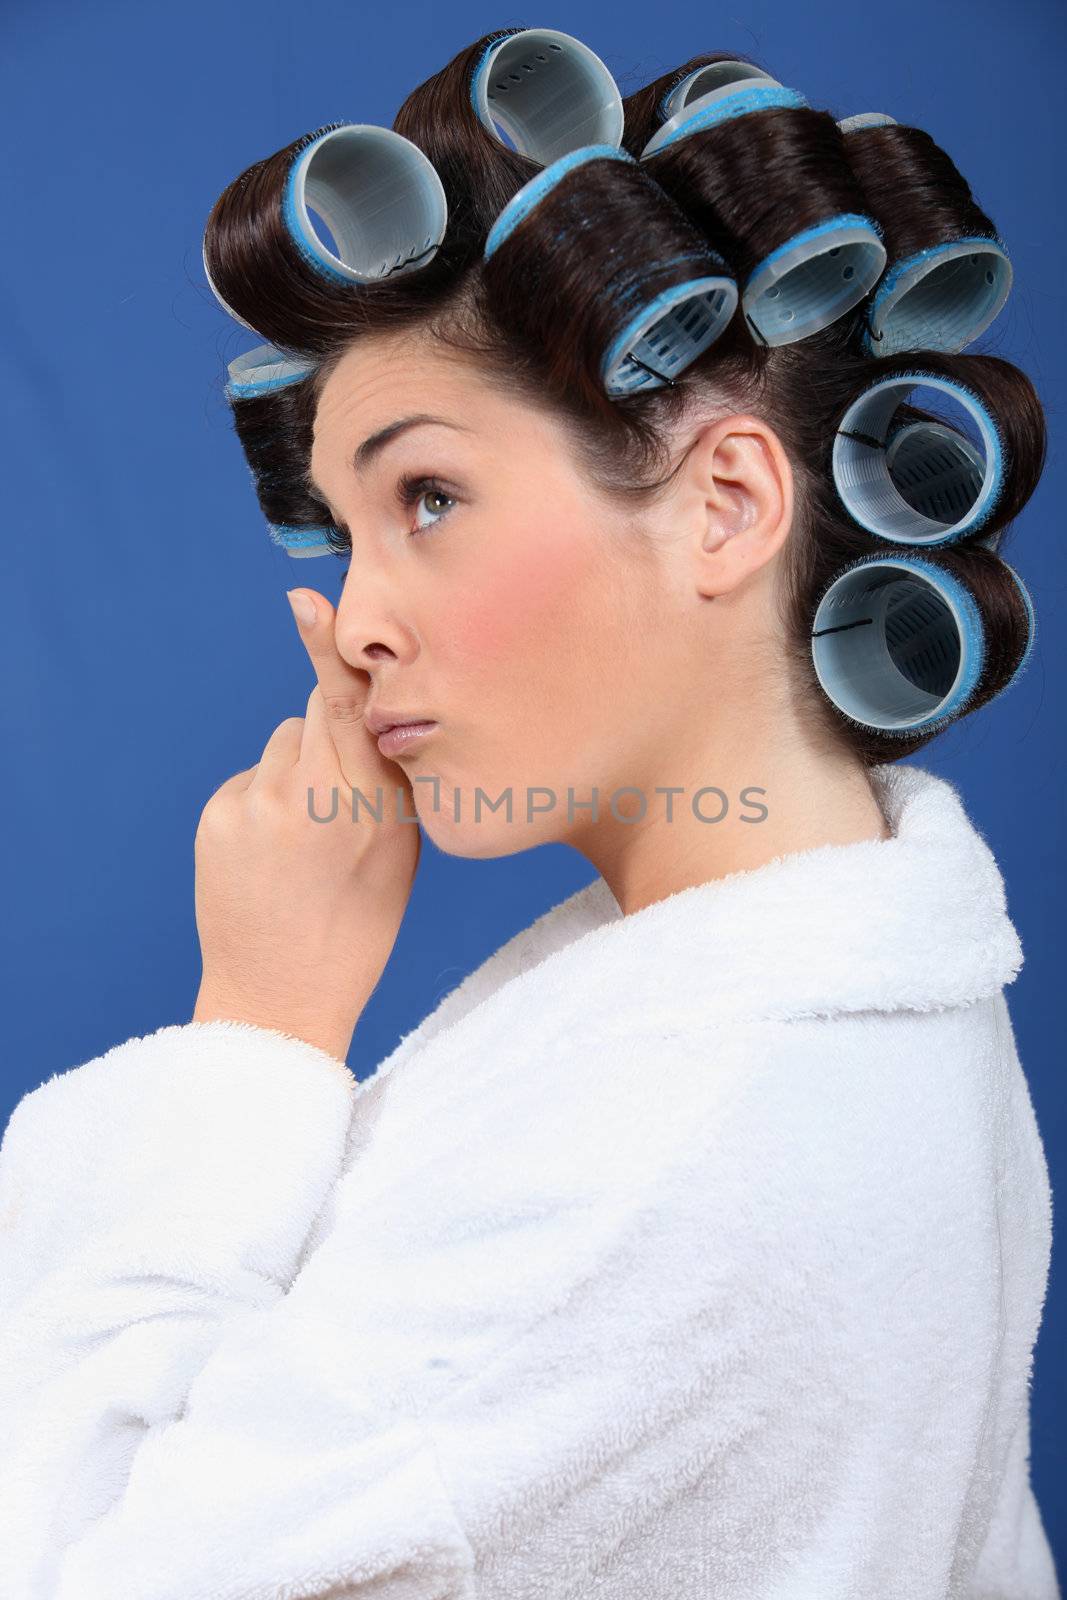 Woman with her hair in rollers by phovoir